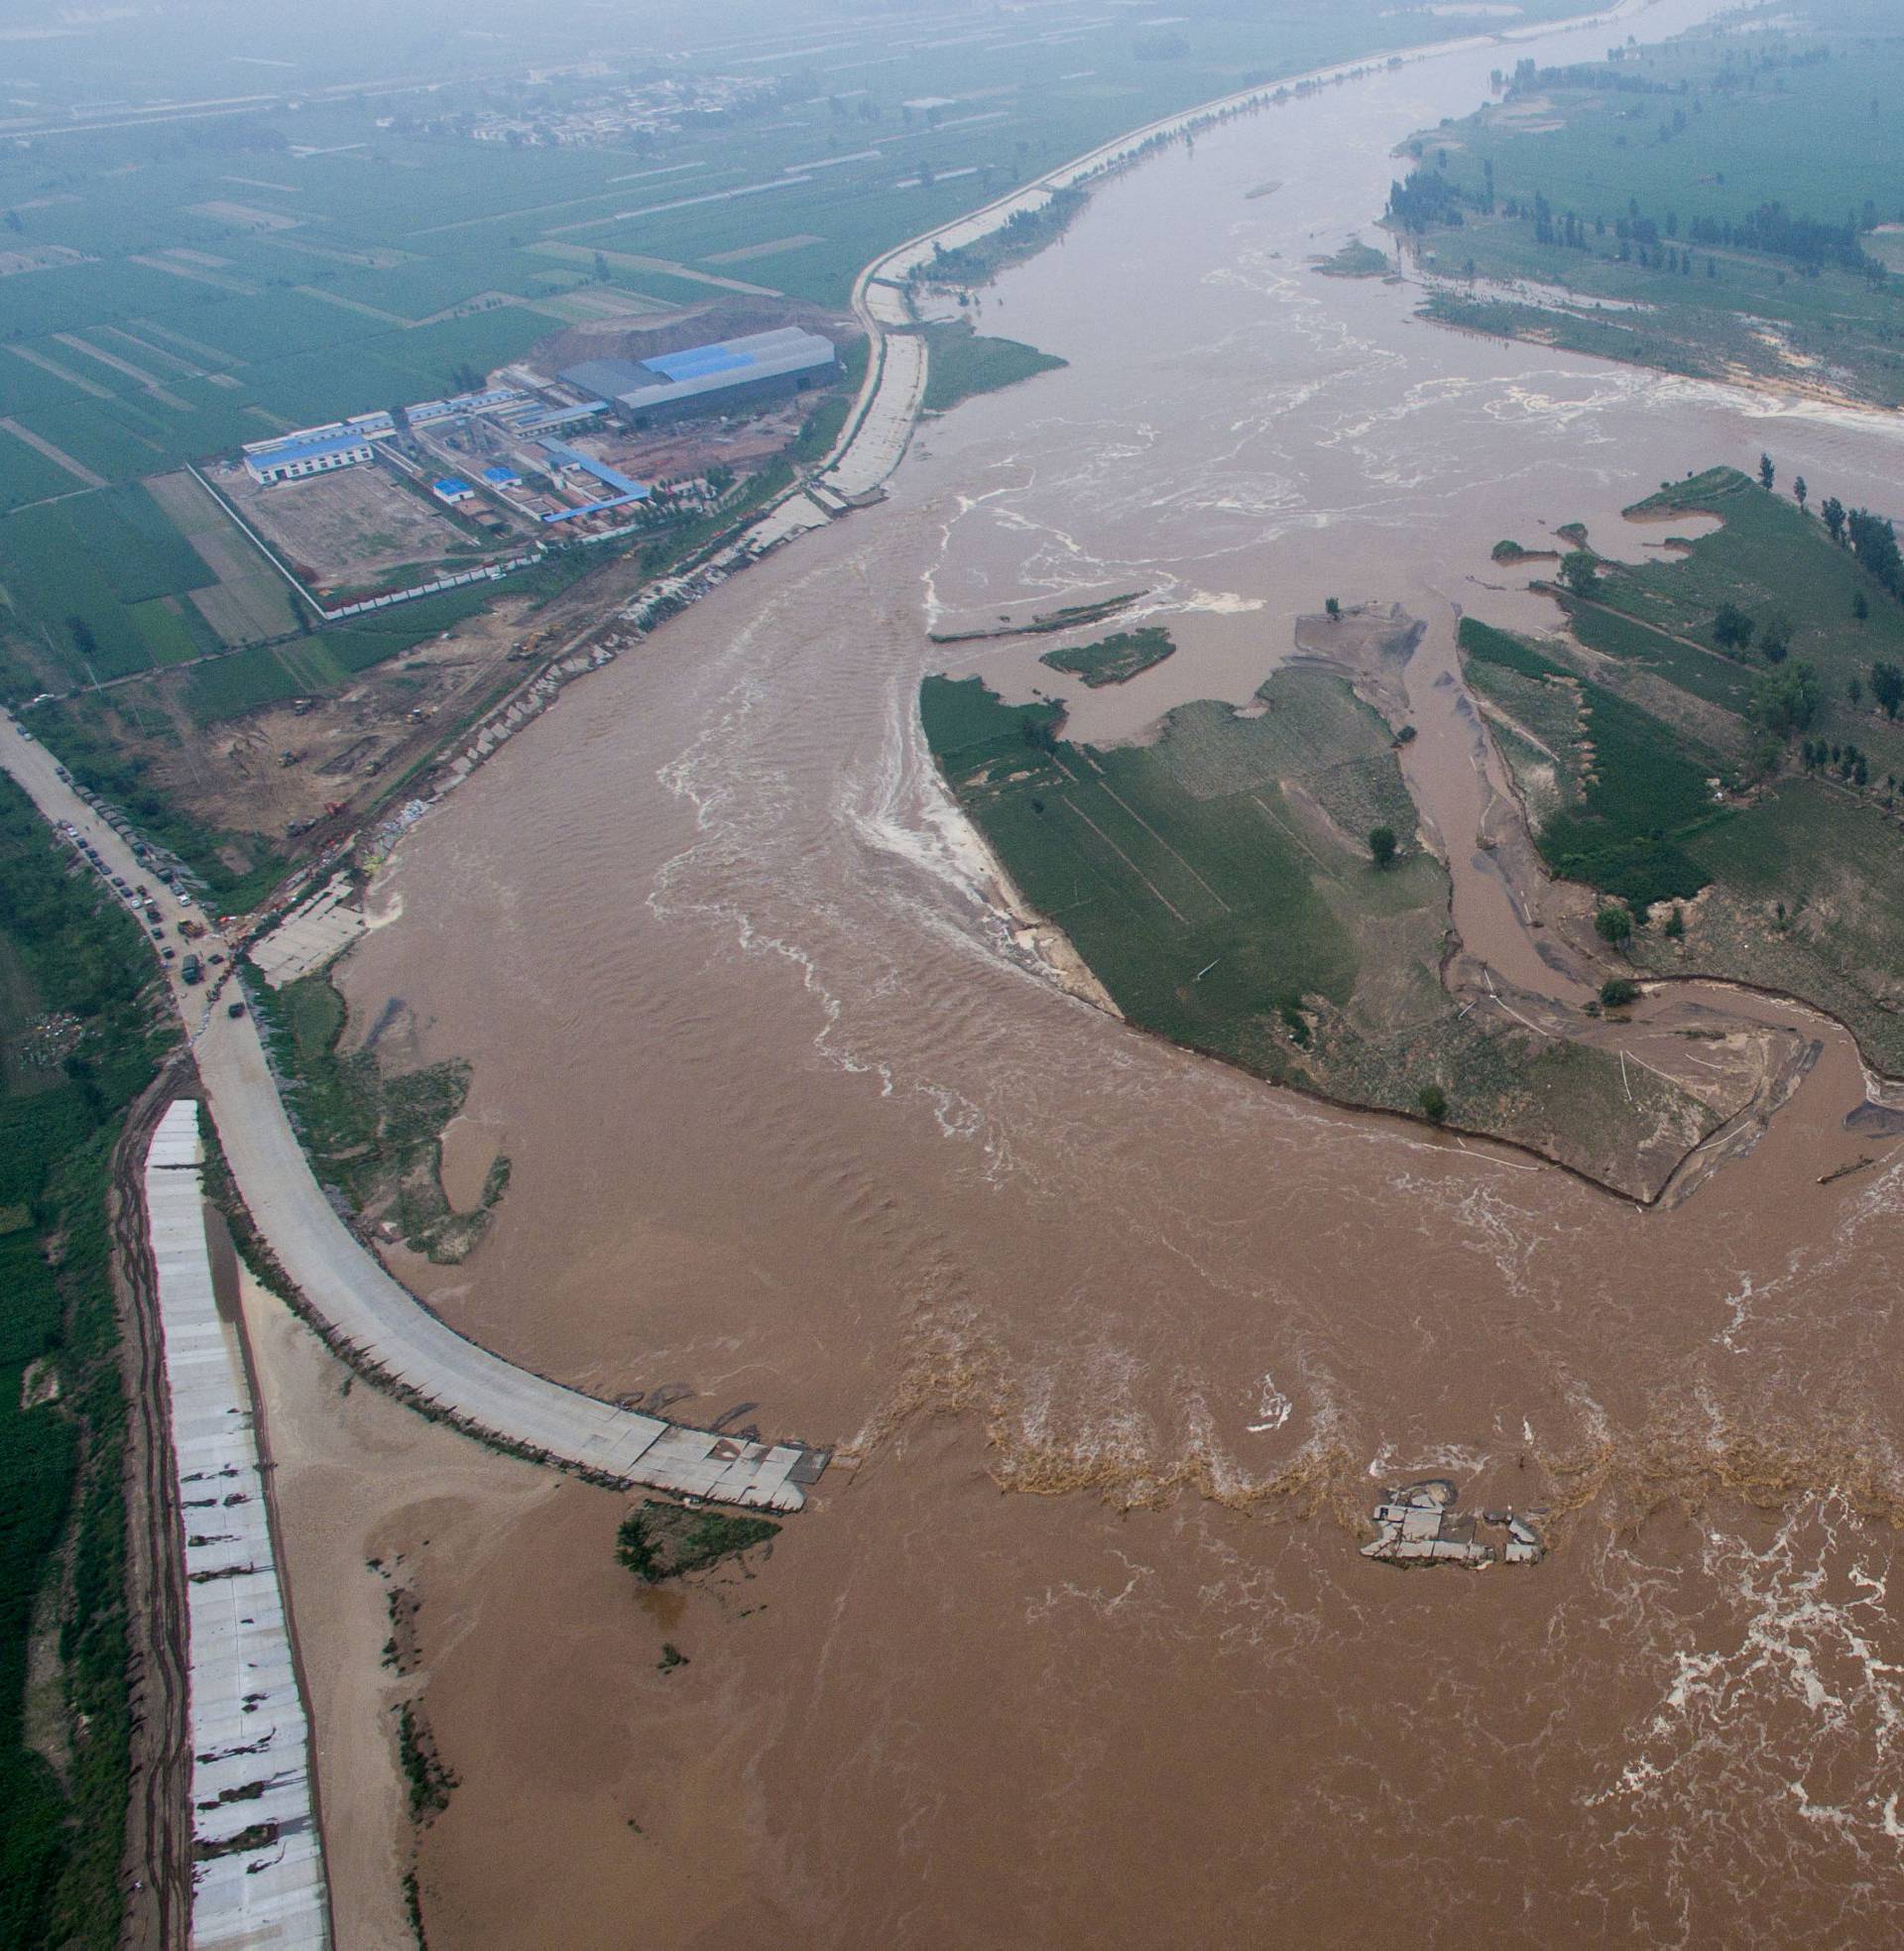 An aerial view shows that roads and fields are flooded in Xingtai